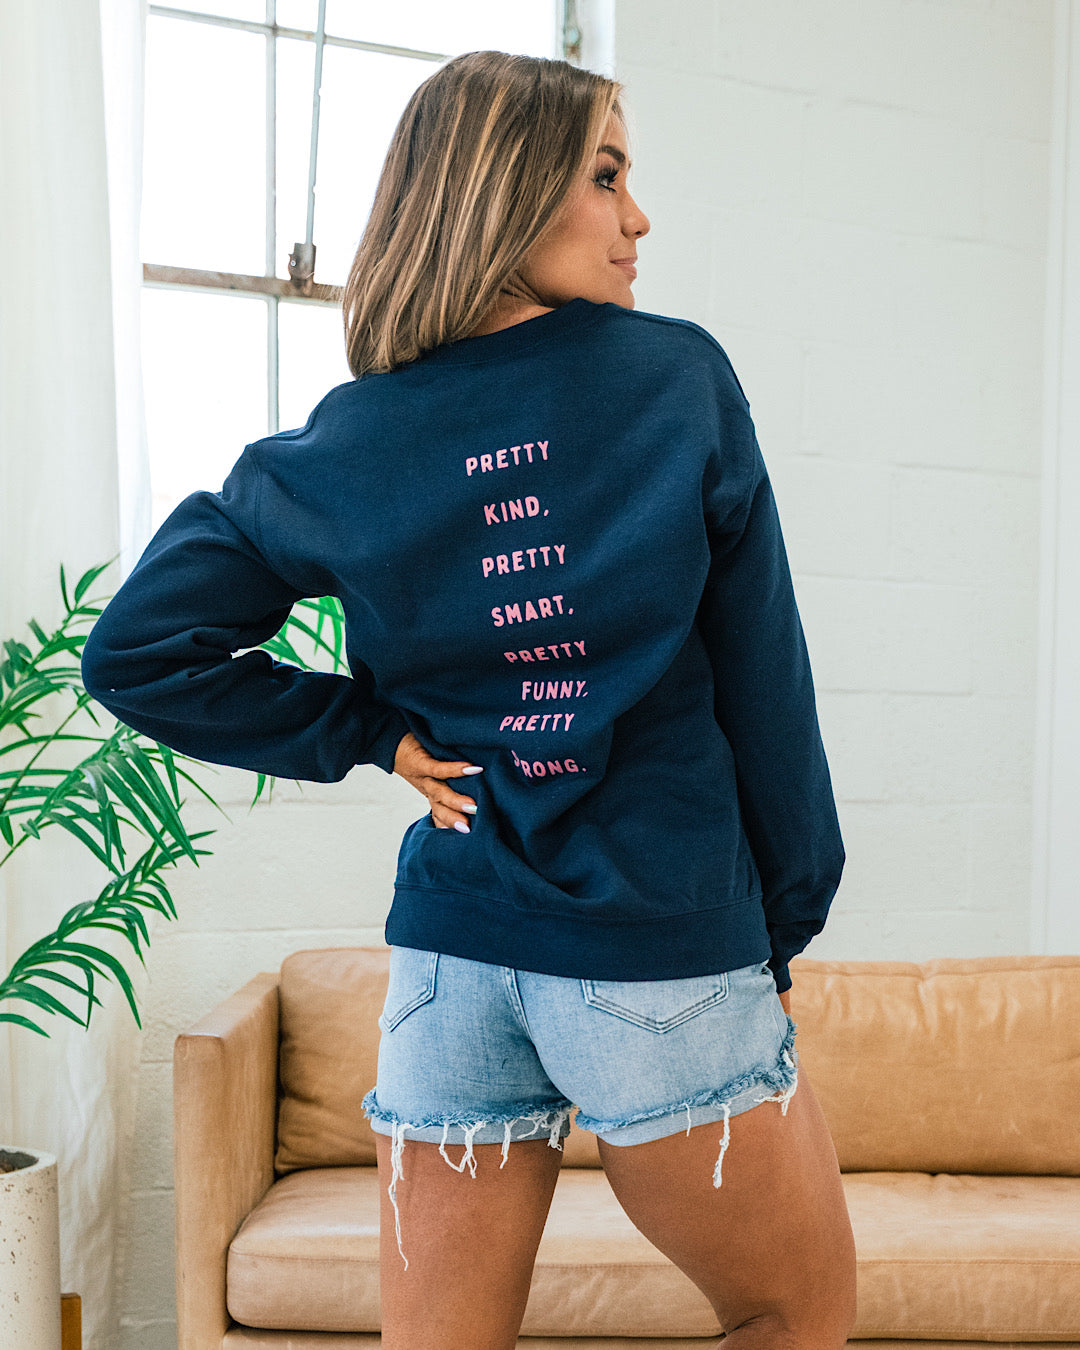 NEW! Aim to Be Sweatshirt - Navy  Southern Bliss   